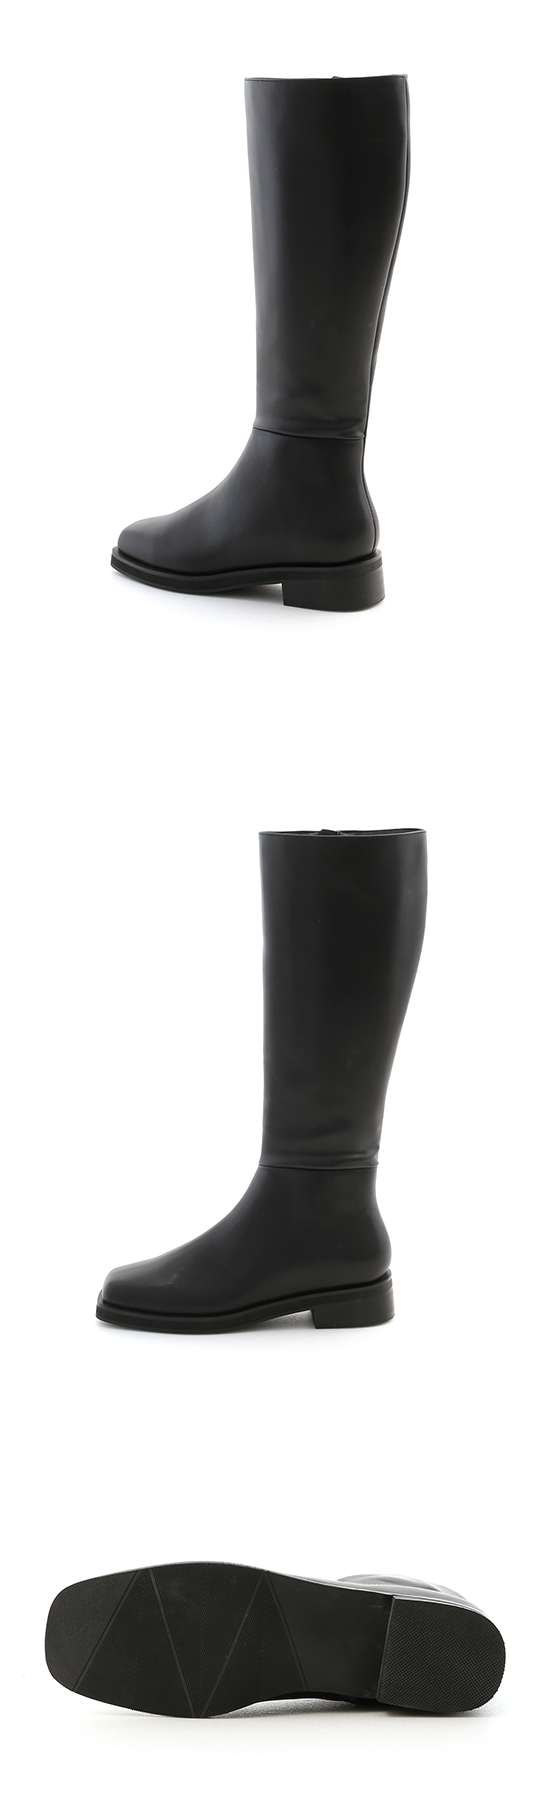 Fitted Square Toe Under-The-Knee Boots Black